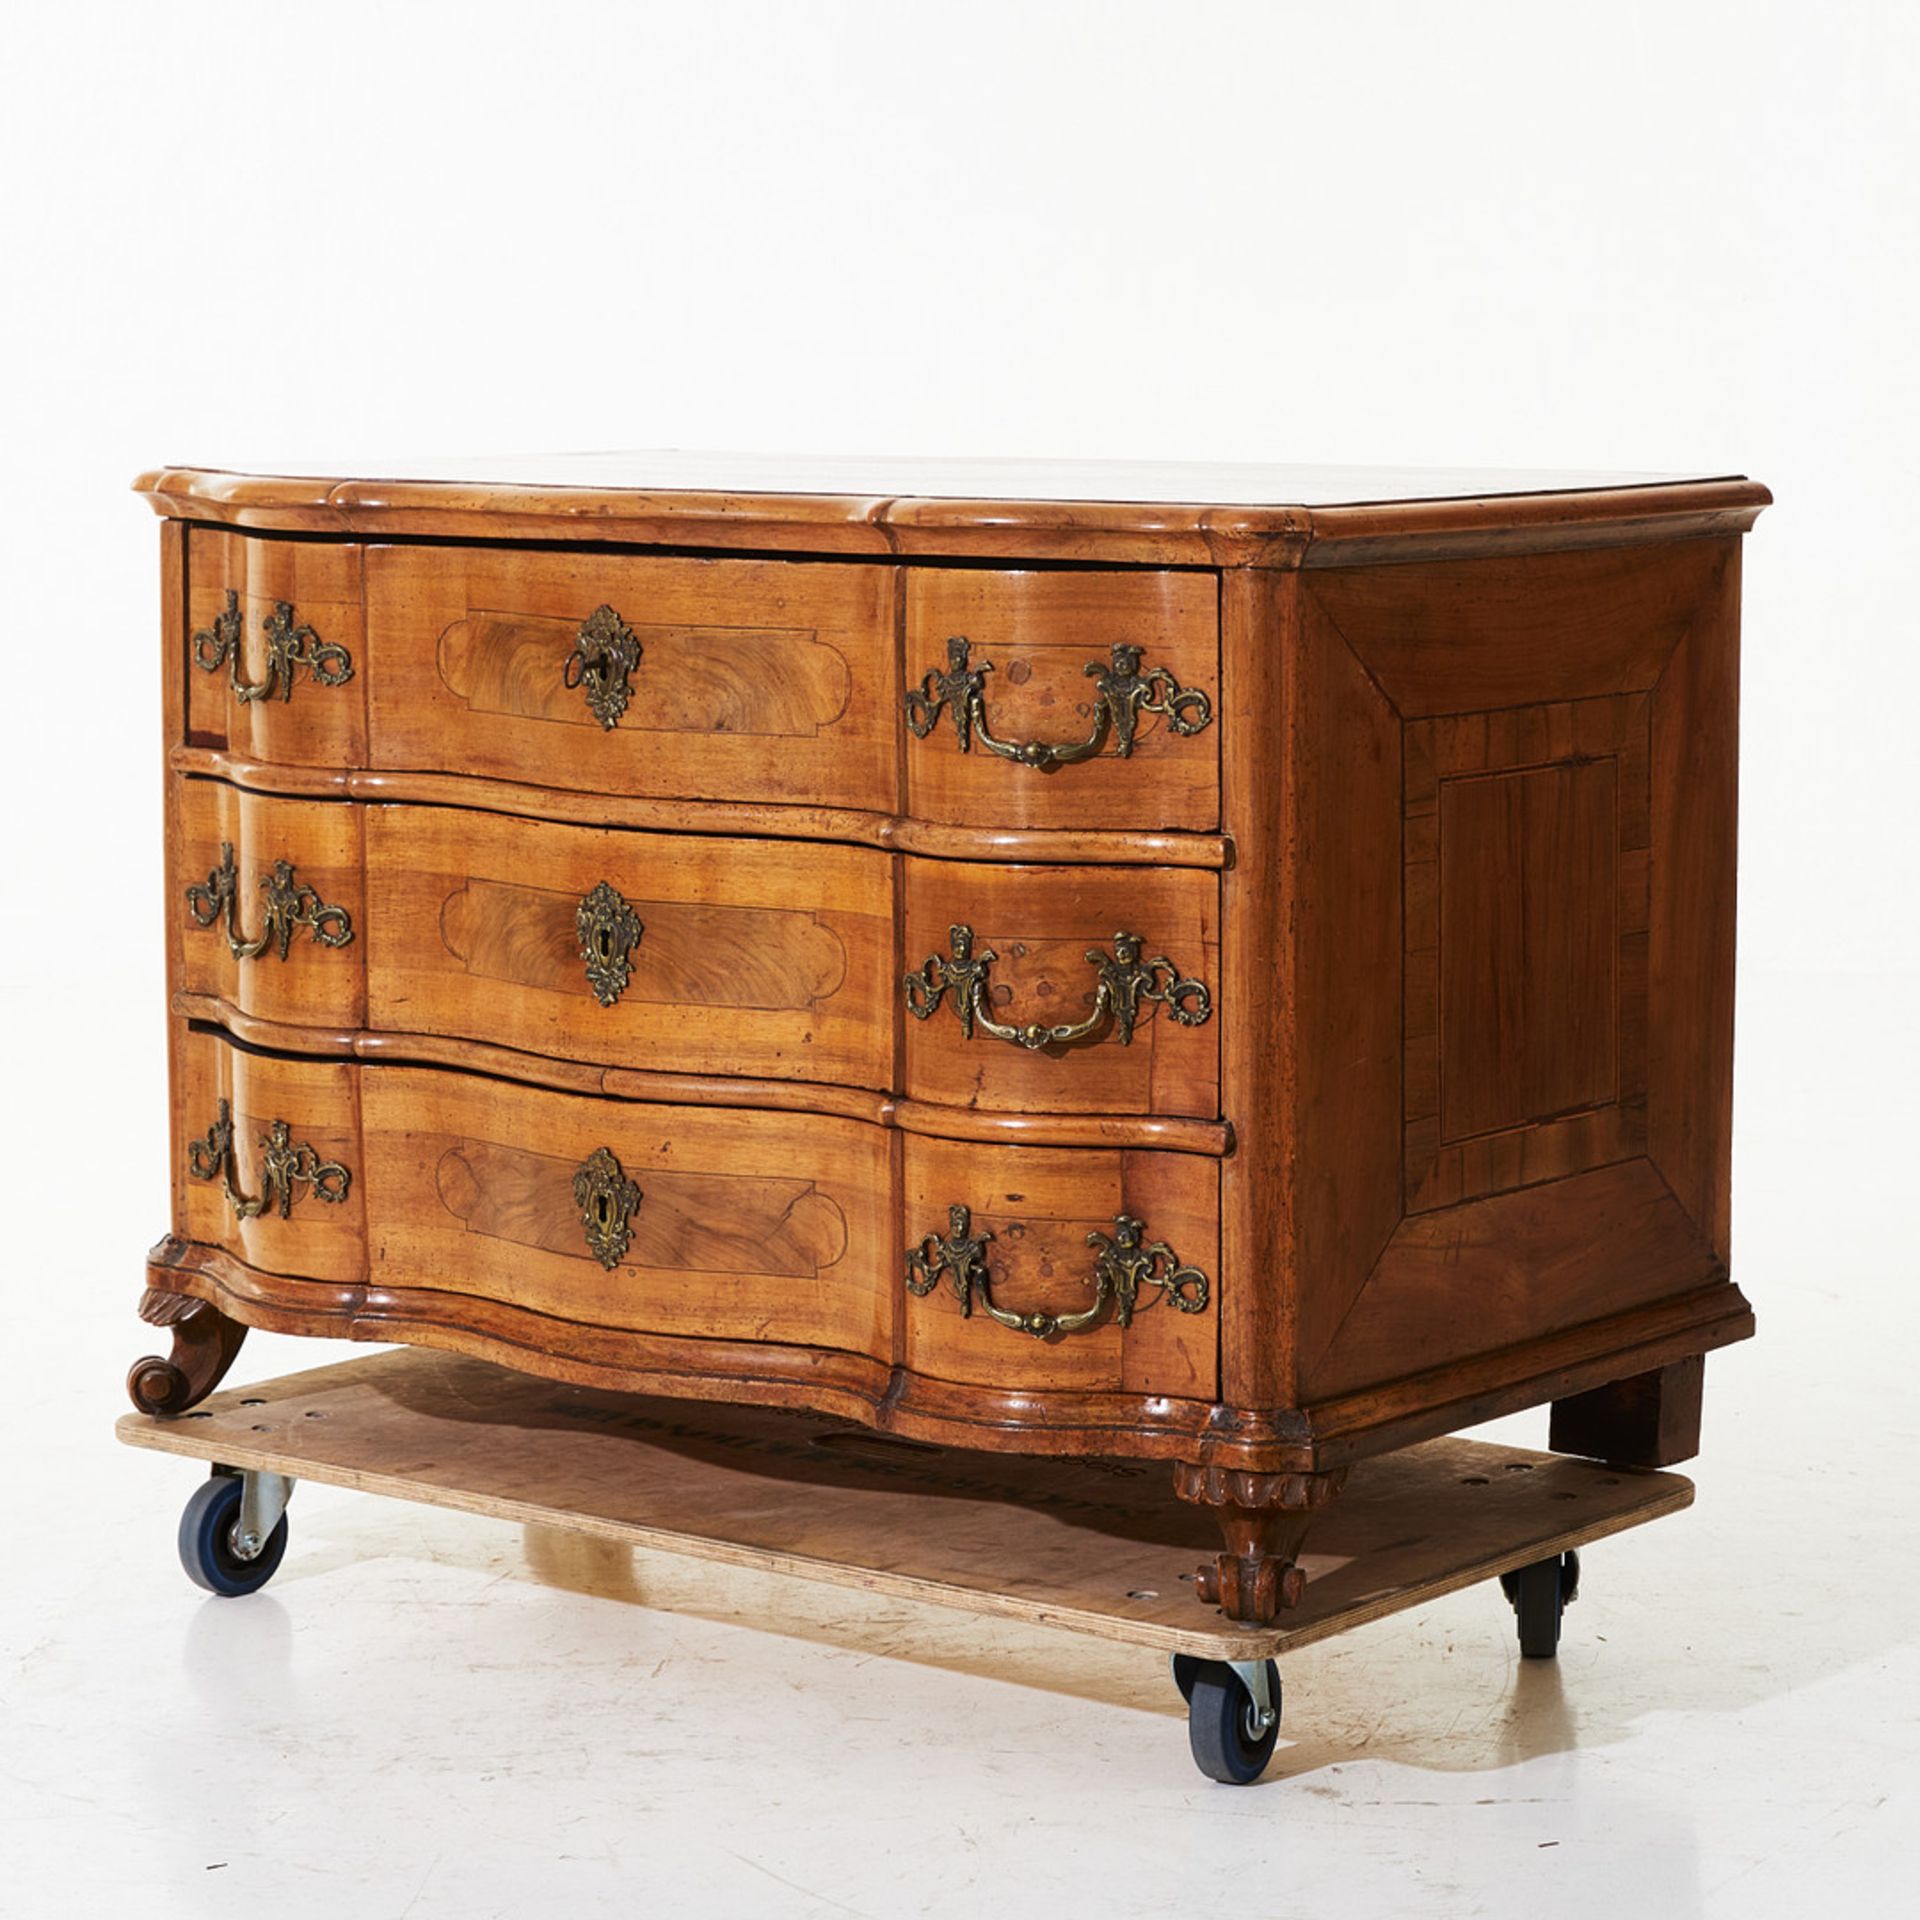 AN 18TH CENTURY ITALIAN WALNUT SERPENTINE CHEST OF DRAWERS - Image 6 of 8